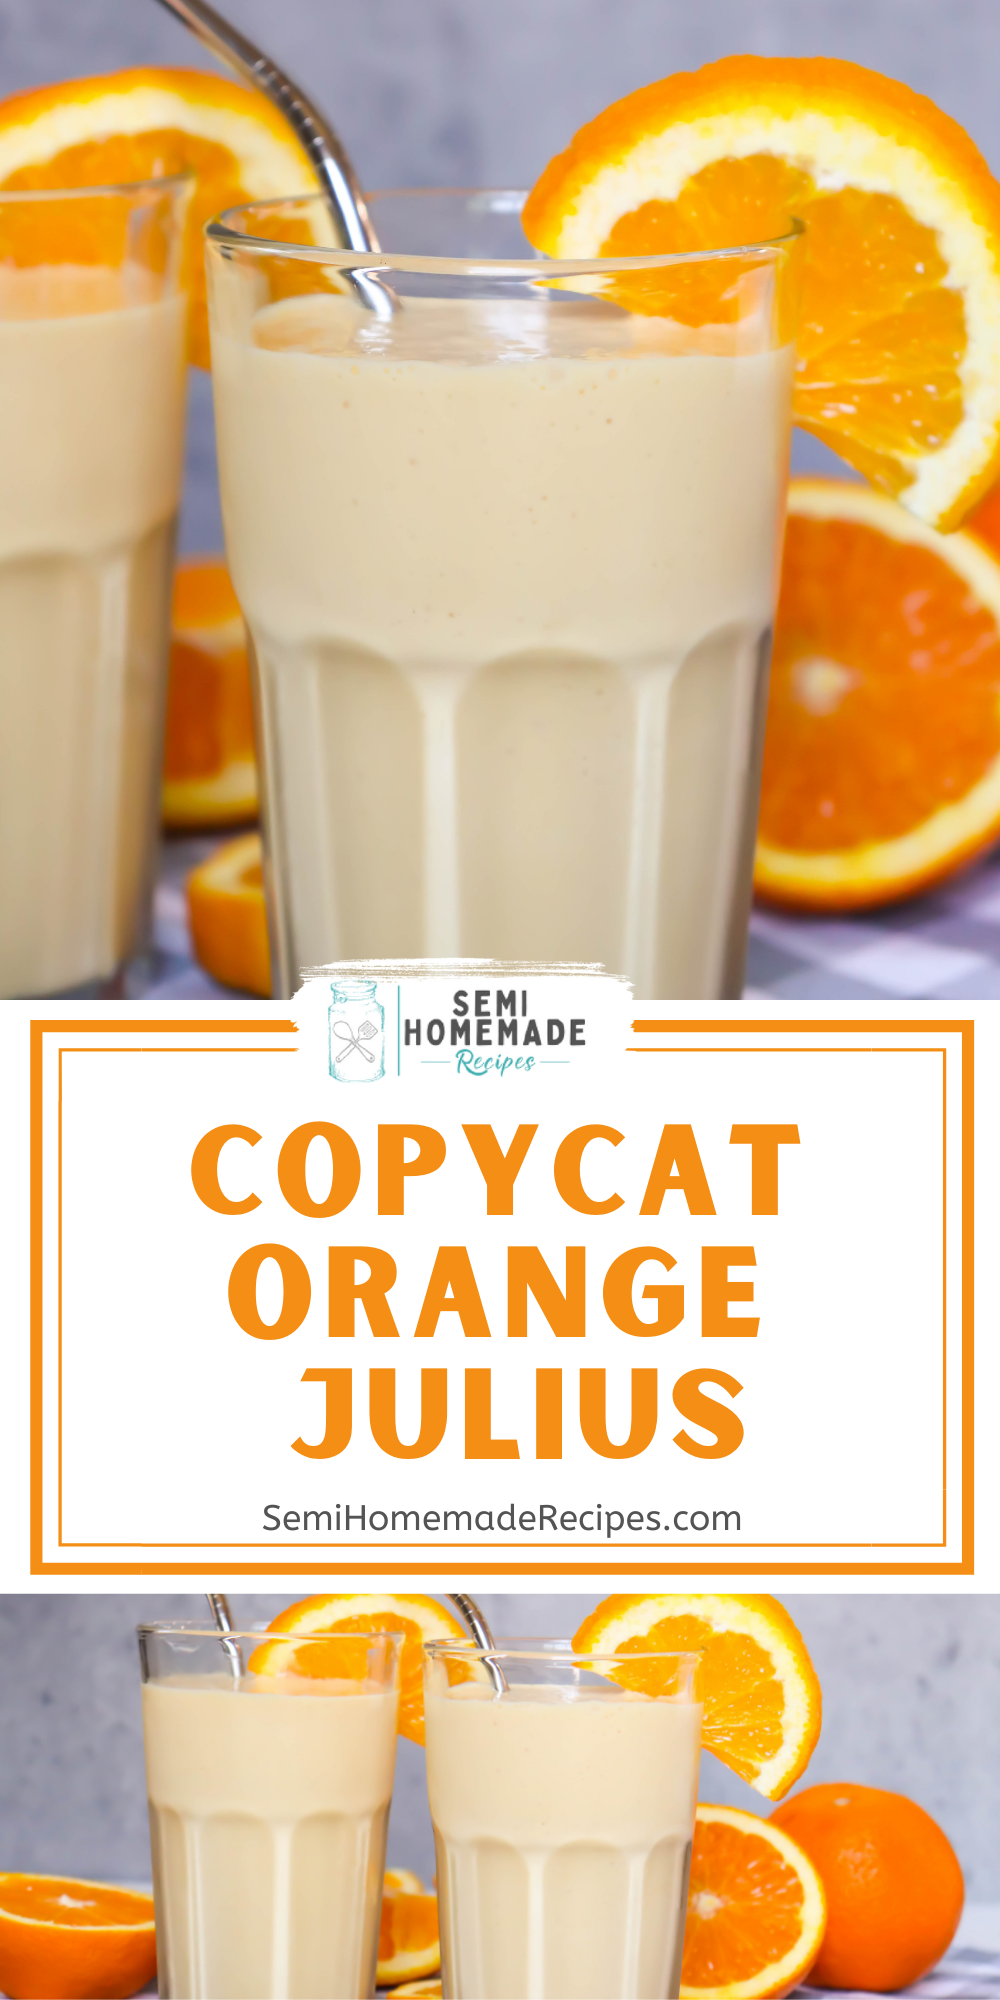 Have you ever had an Orange Julius? You've got to try this easy homemade Copycat Orange Julius recipe!